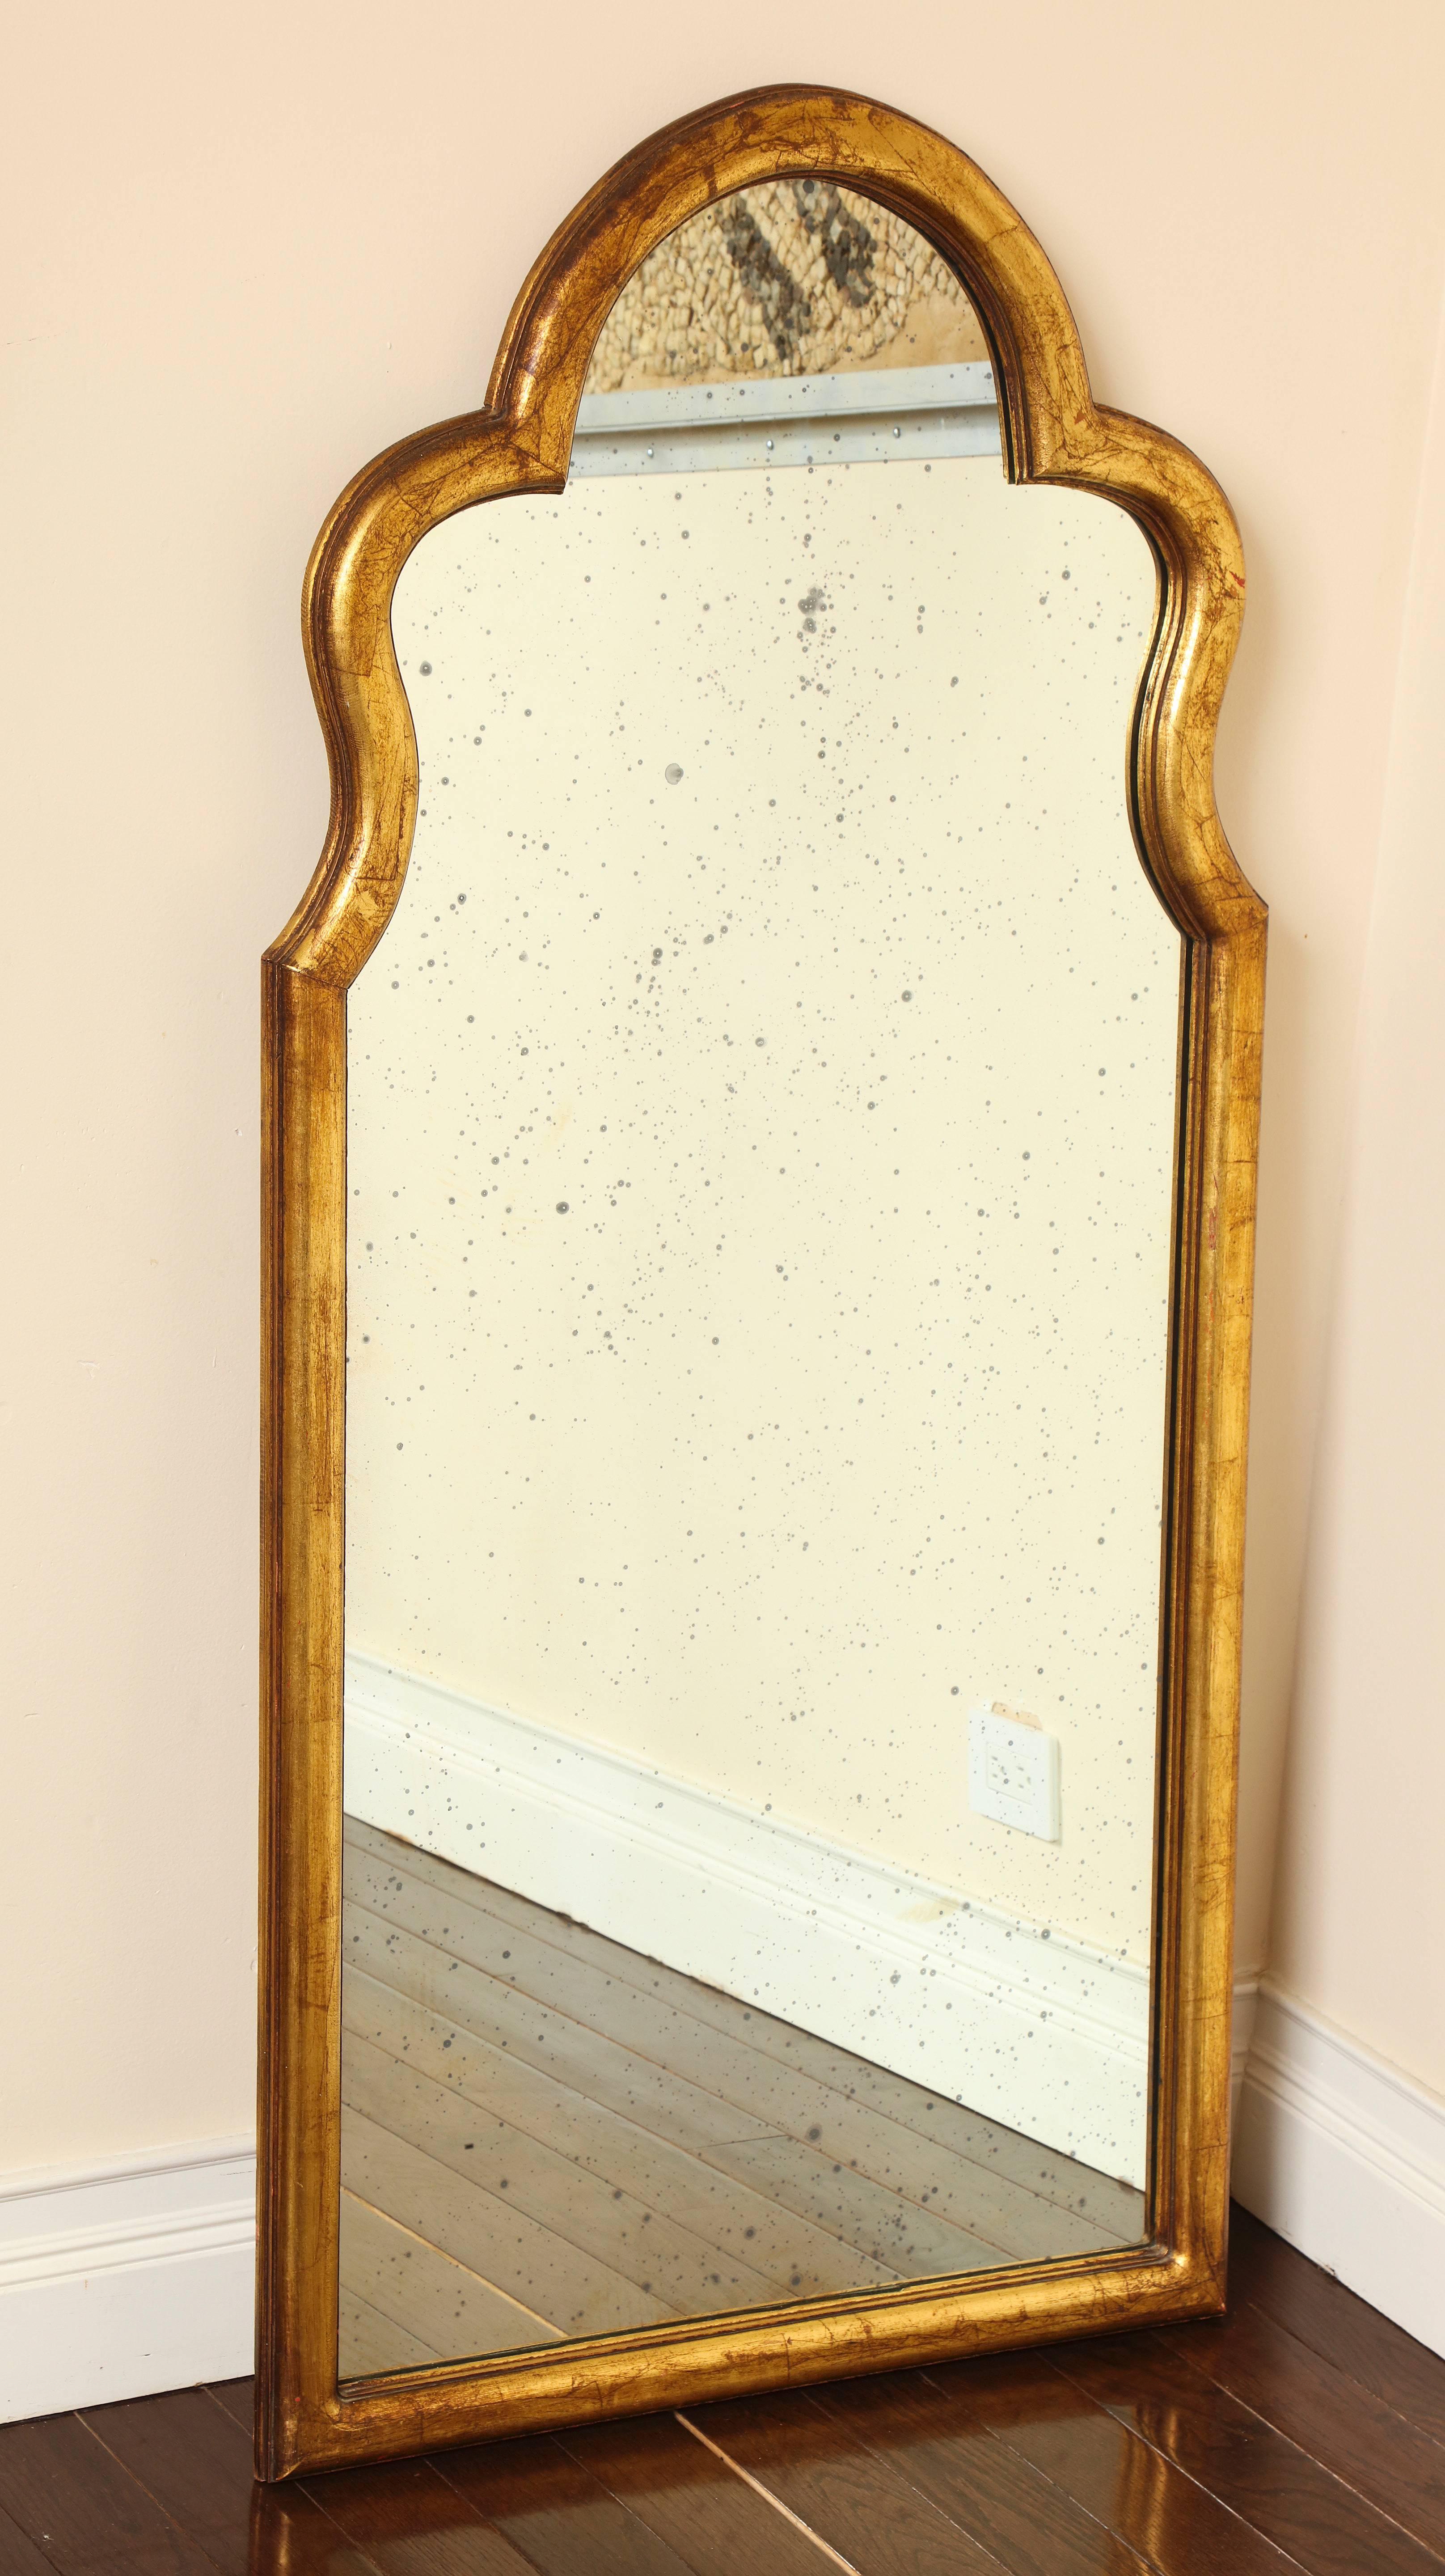 American Gilded Queen Anne Inspired Mirror with Antiqued Mirrored Glass